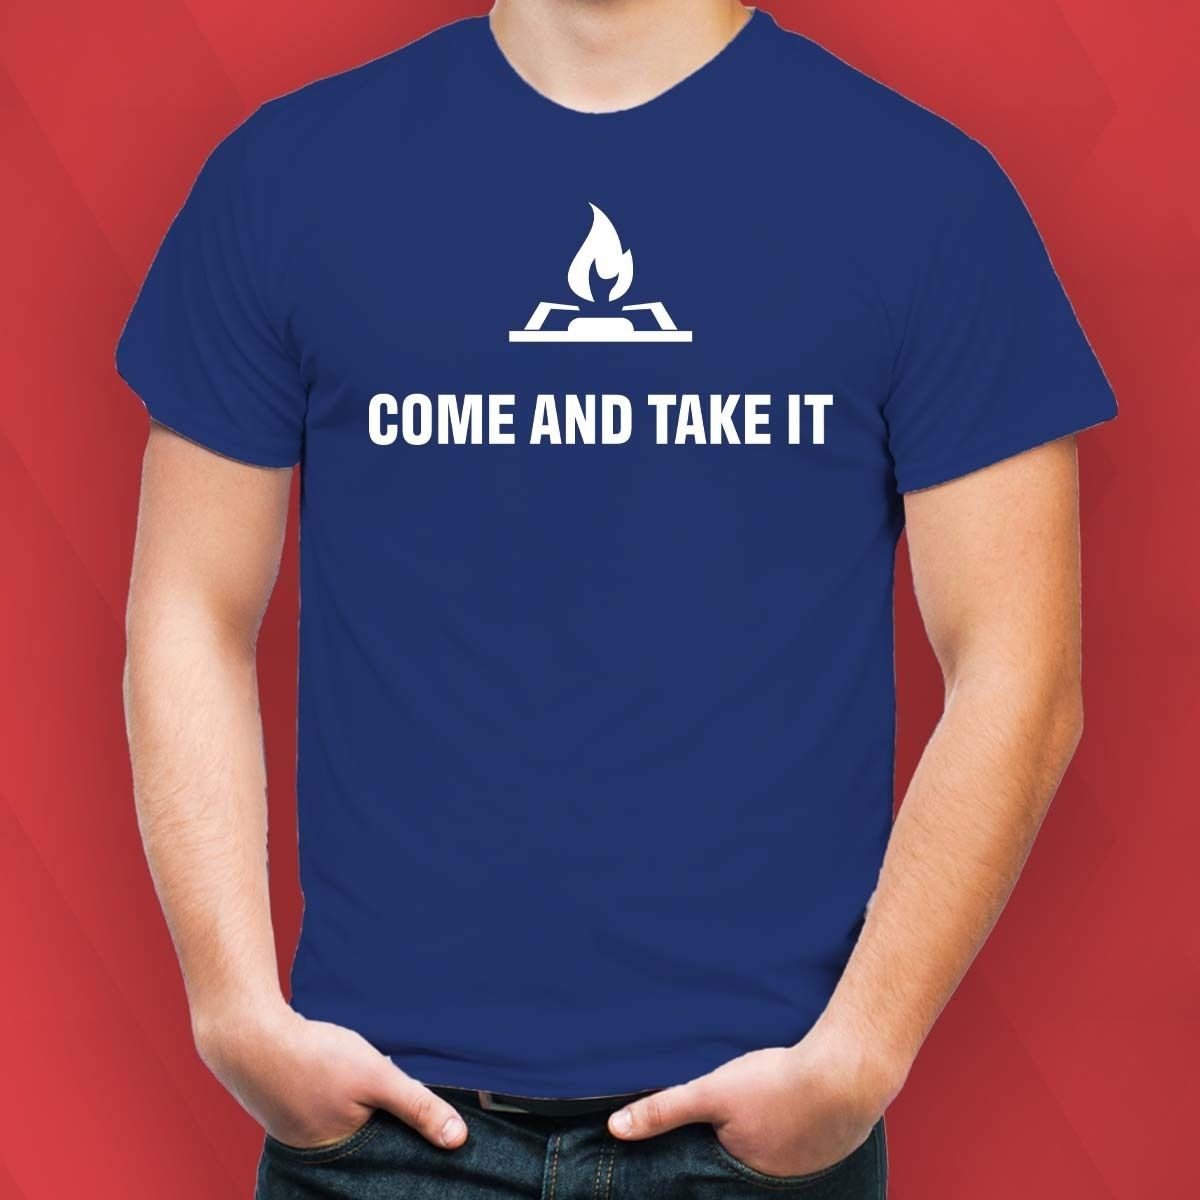 01 10 23 kygop come and take it wr design